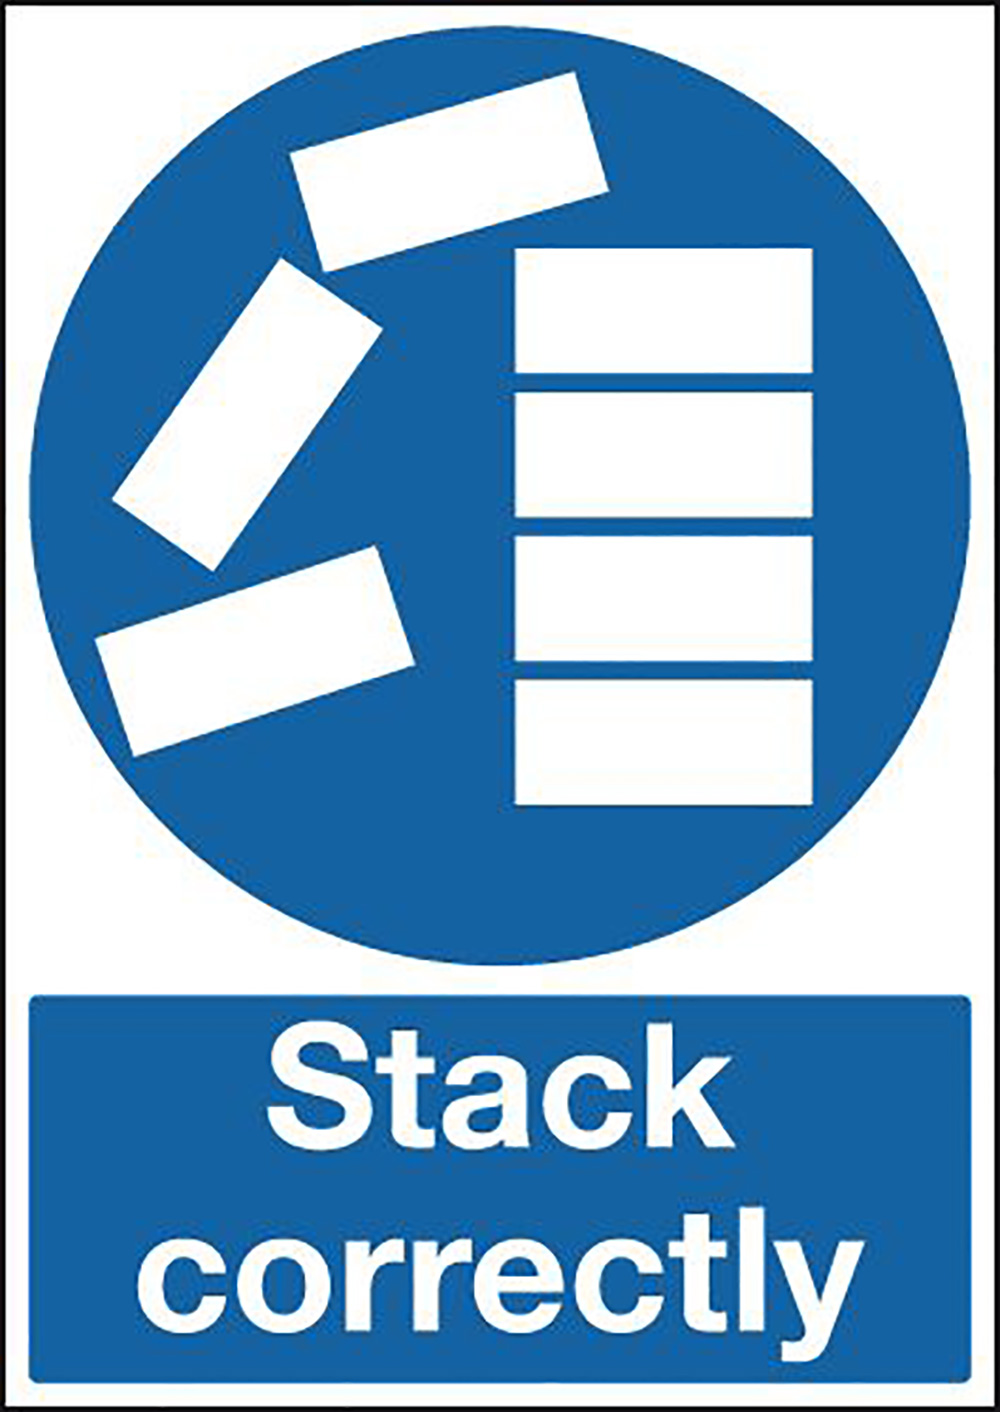 Stack Correctly 297x210mm 1.2mm Rigid Plastic Safety Sign  